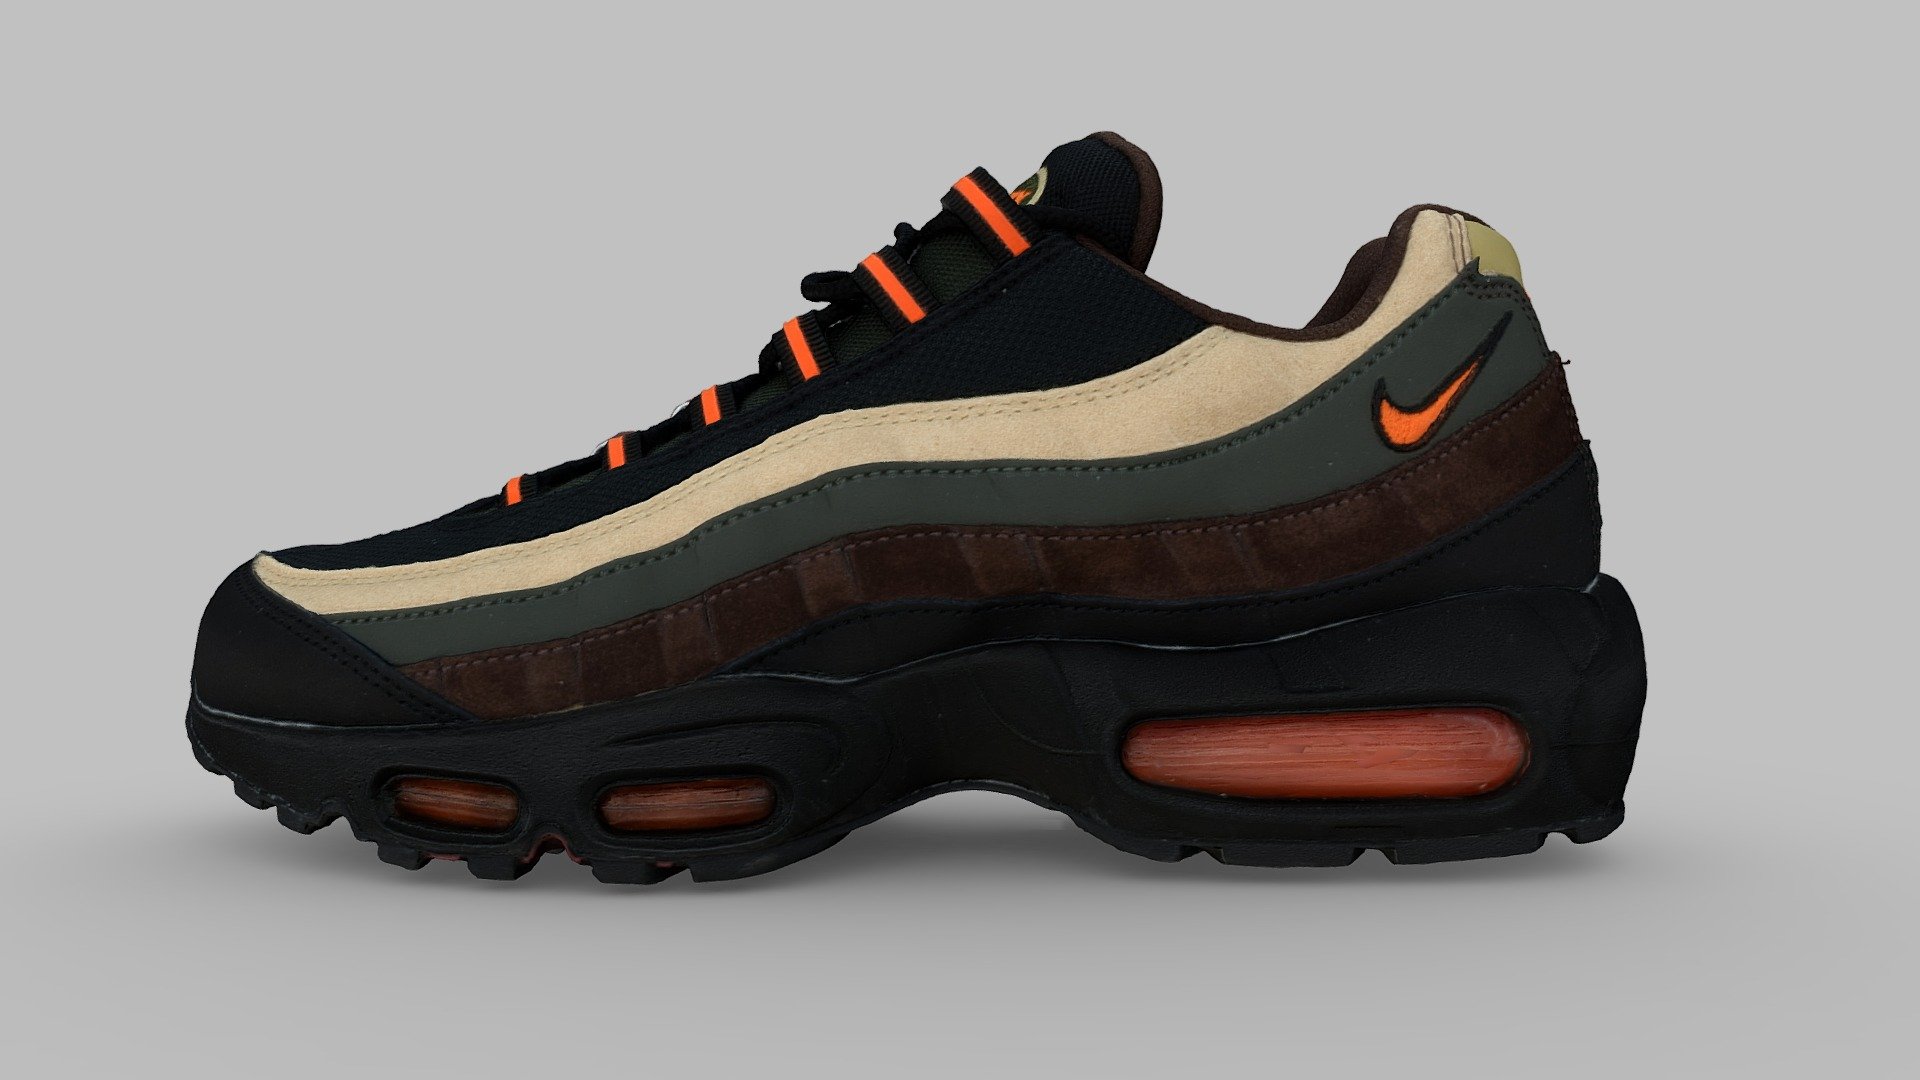 Nike Air Max 95 Dark Army/Orange Blaze-Tweed Militaire Fonce/Flamme Orange

Please use the Model Inspector to remove Textures and view MatCap before purchase 3d model